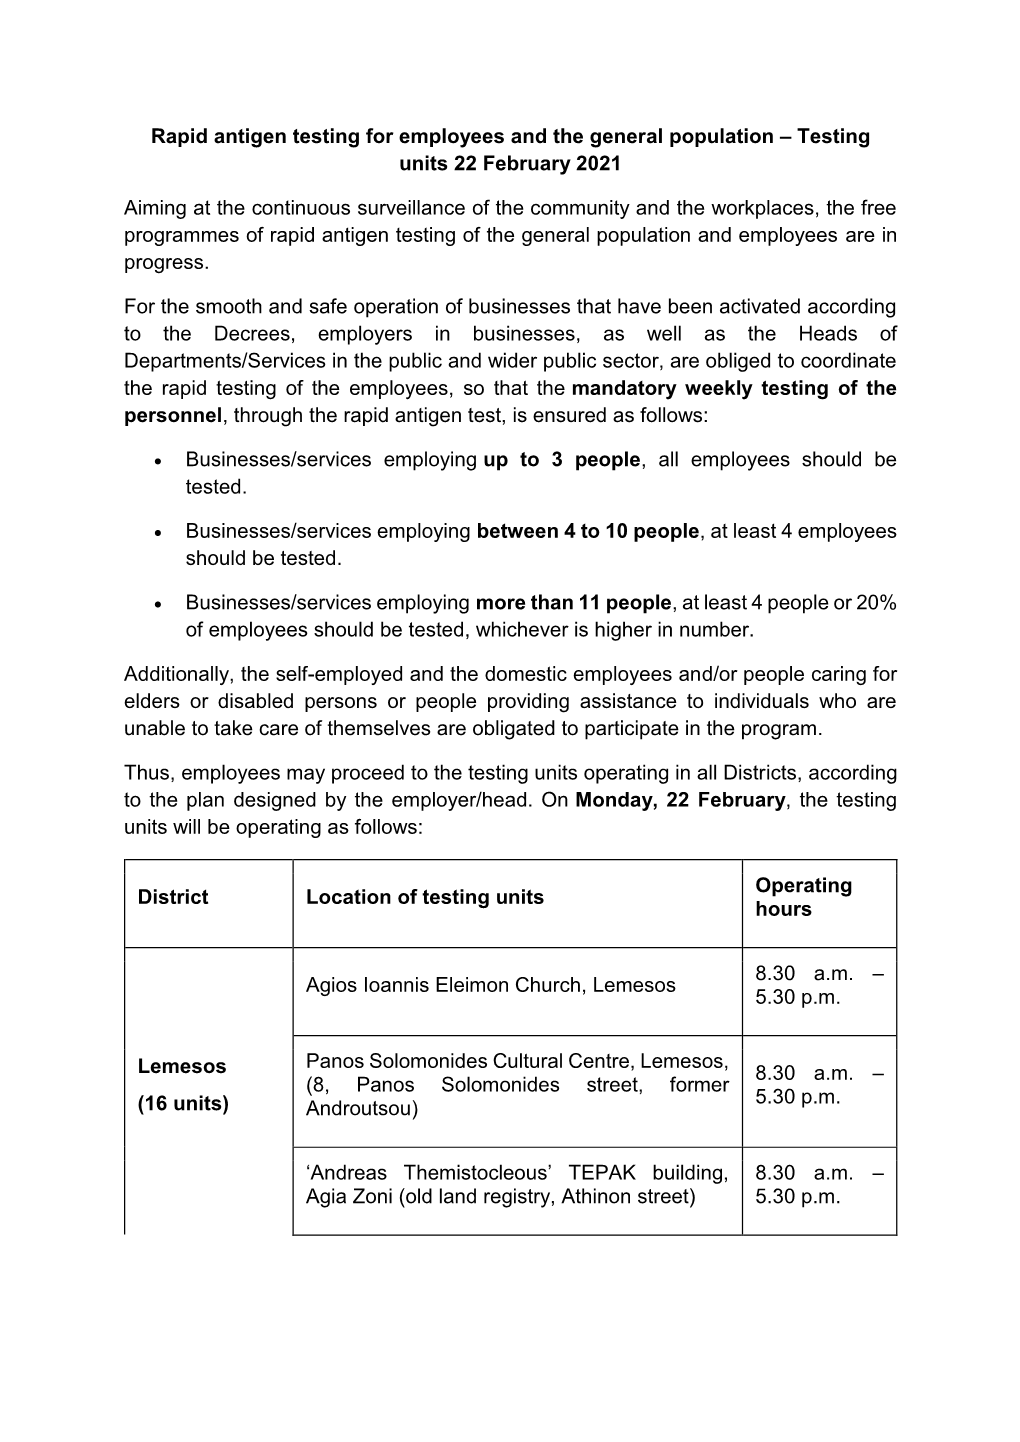 Rapid Antigen Testing for Employees and the General Population – Testing Units 22 February 2021